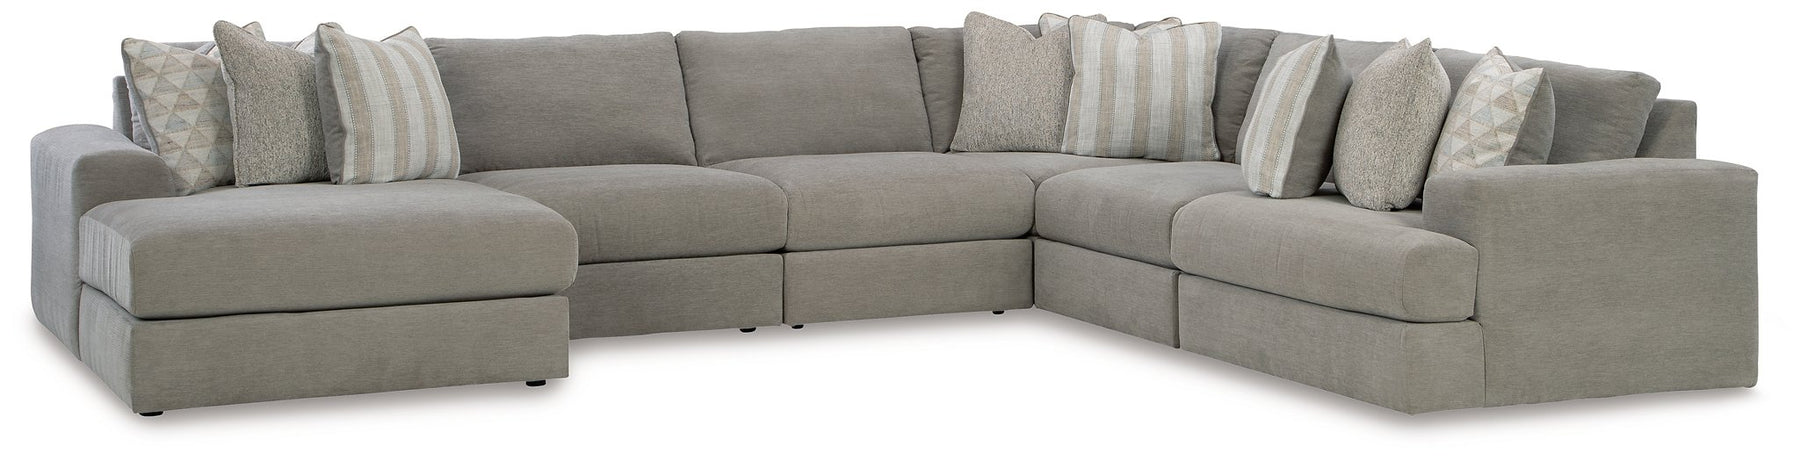 Avaliyah Sectional with Chaise - Half Price Furniture